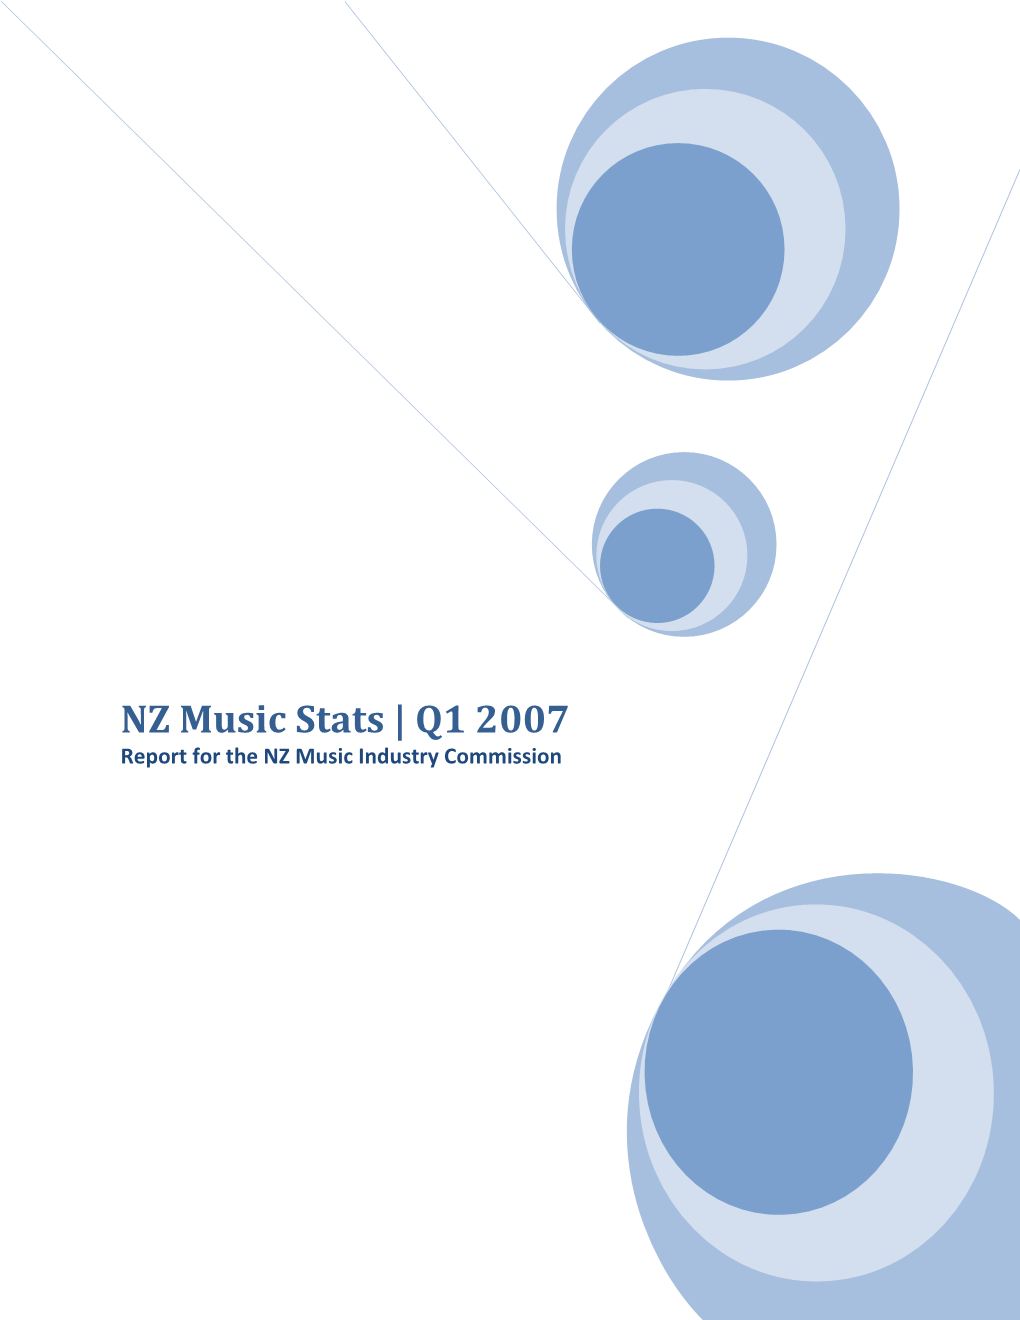 NZ Music Stats | Q1 2007 Report for the NZ Music Industry Commission